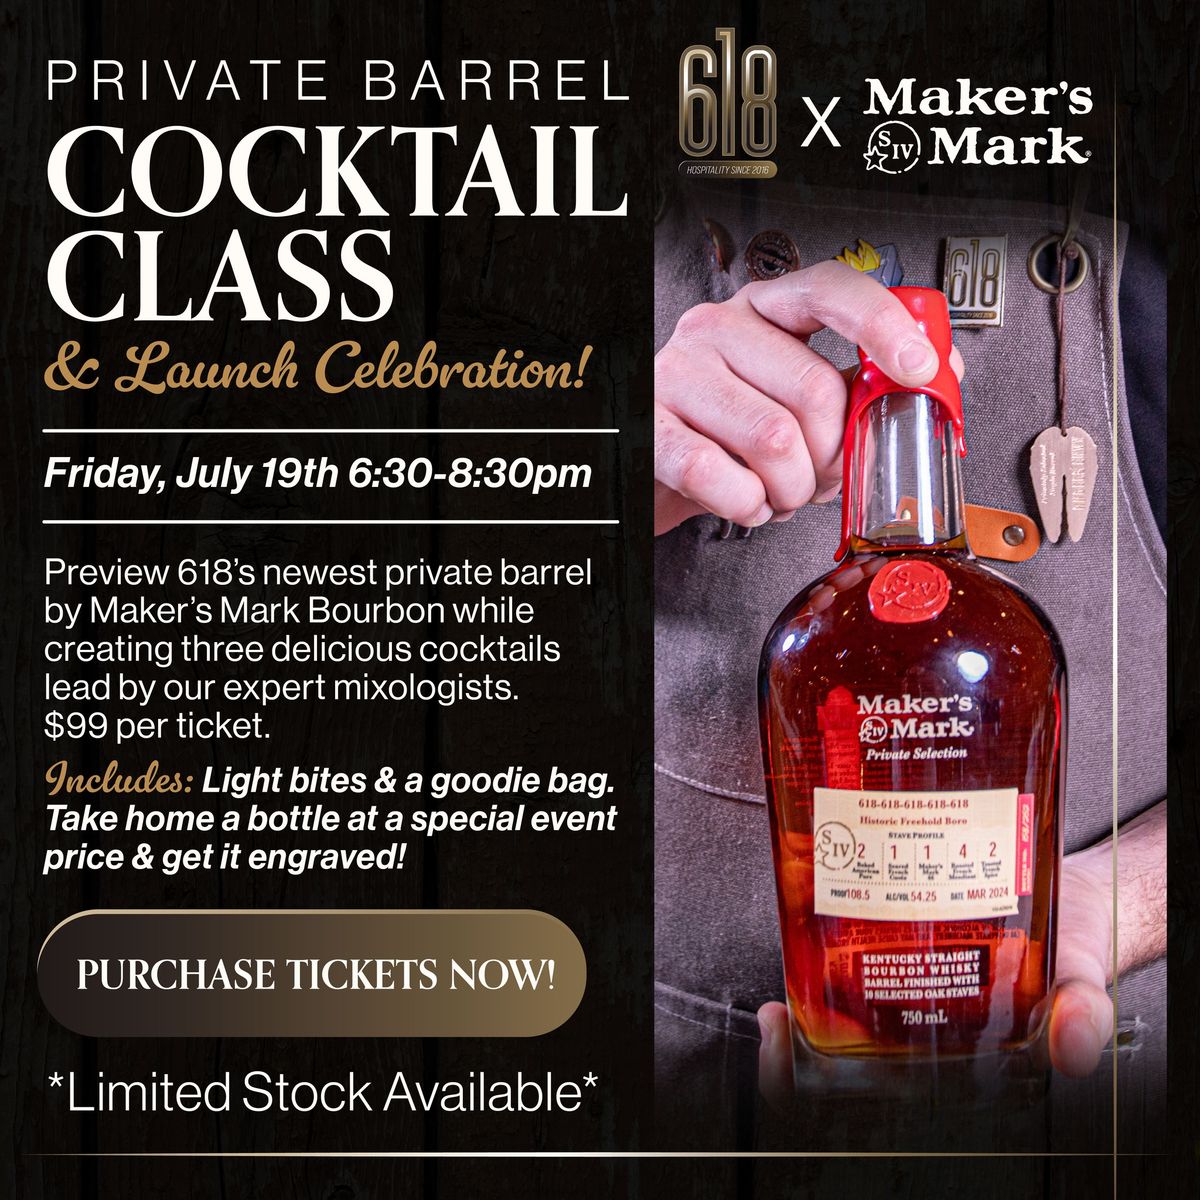 618 x Maker's Mark Launch Party Cocktail Class